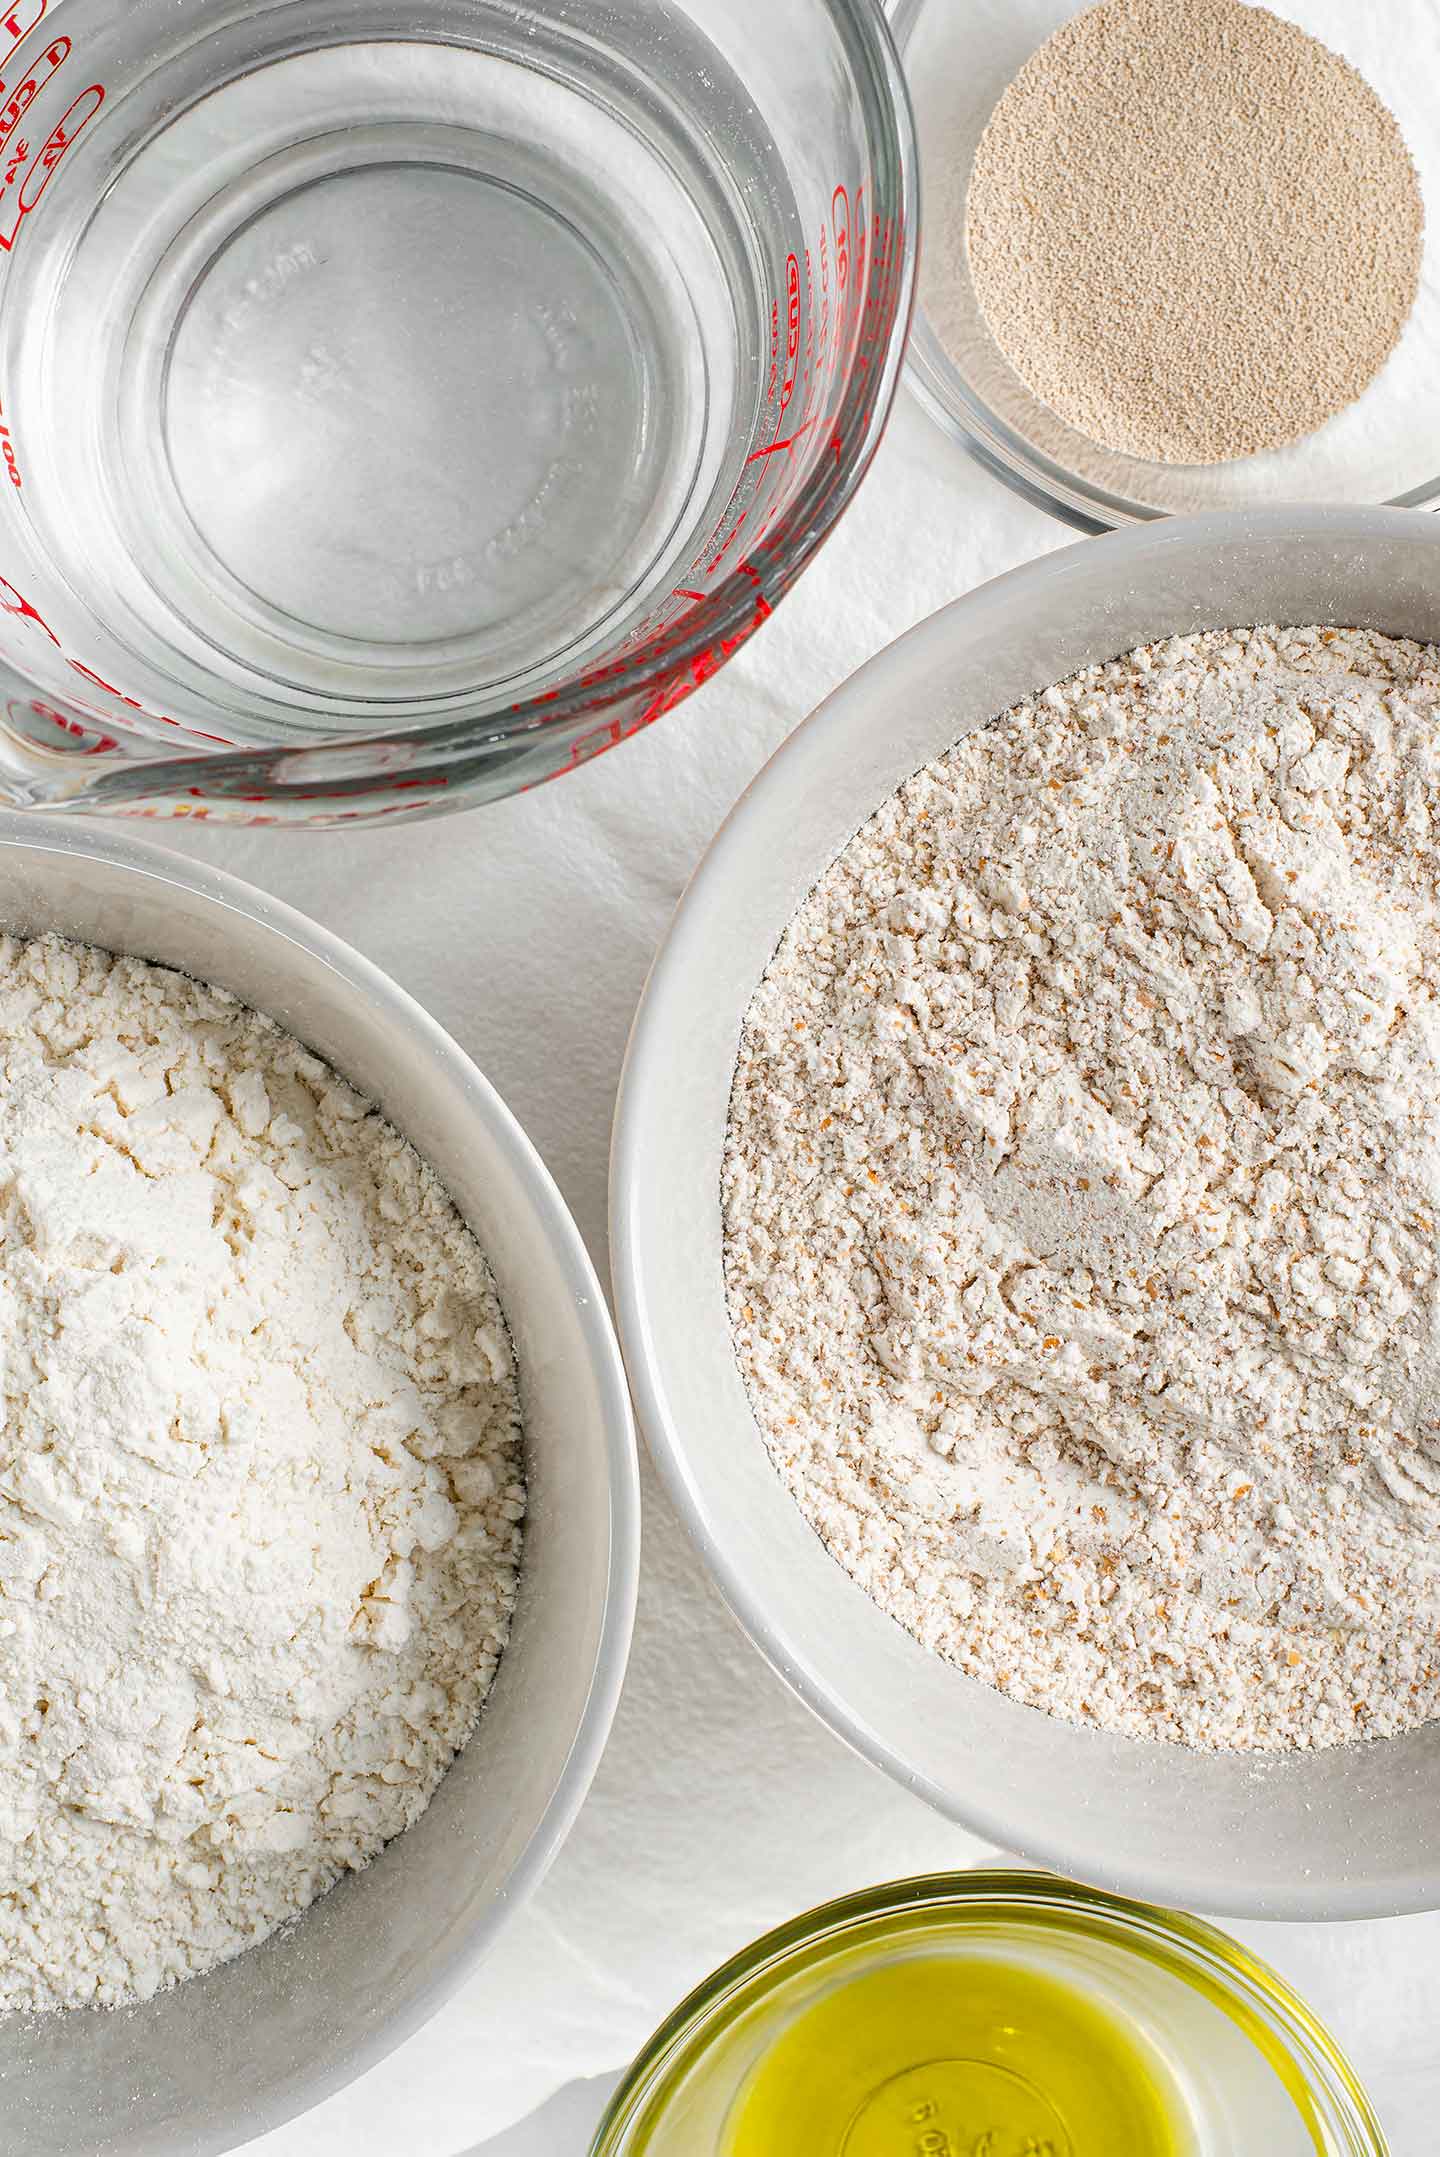 Top down view of white flour and whole wheat flour in separate bowl. Olive oil, active dry yeast, and a measuring cup of water are around the flour.